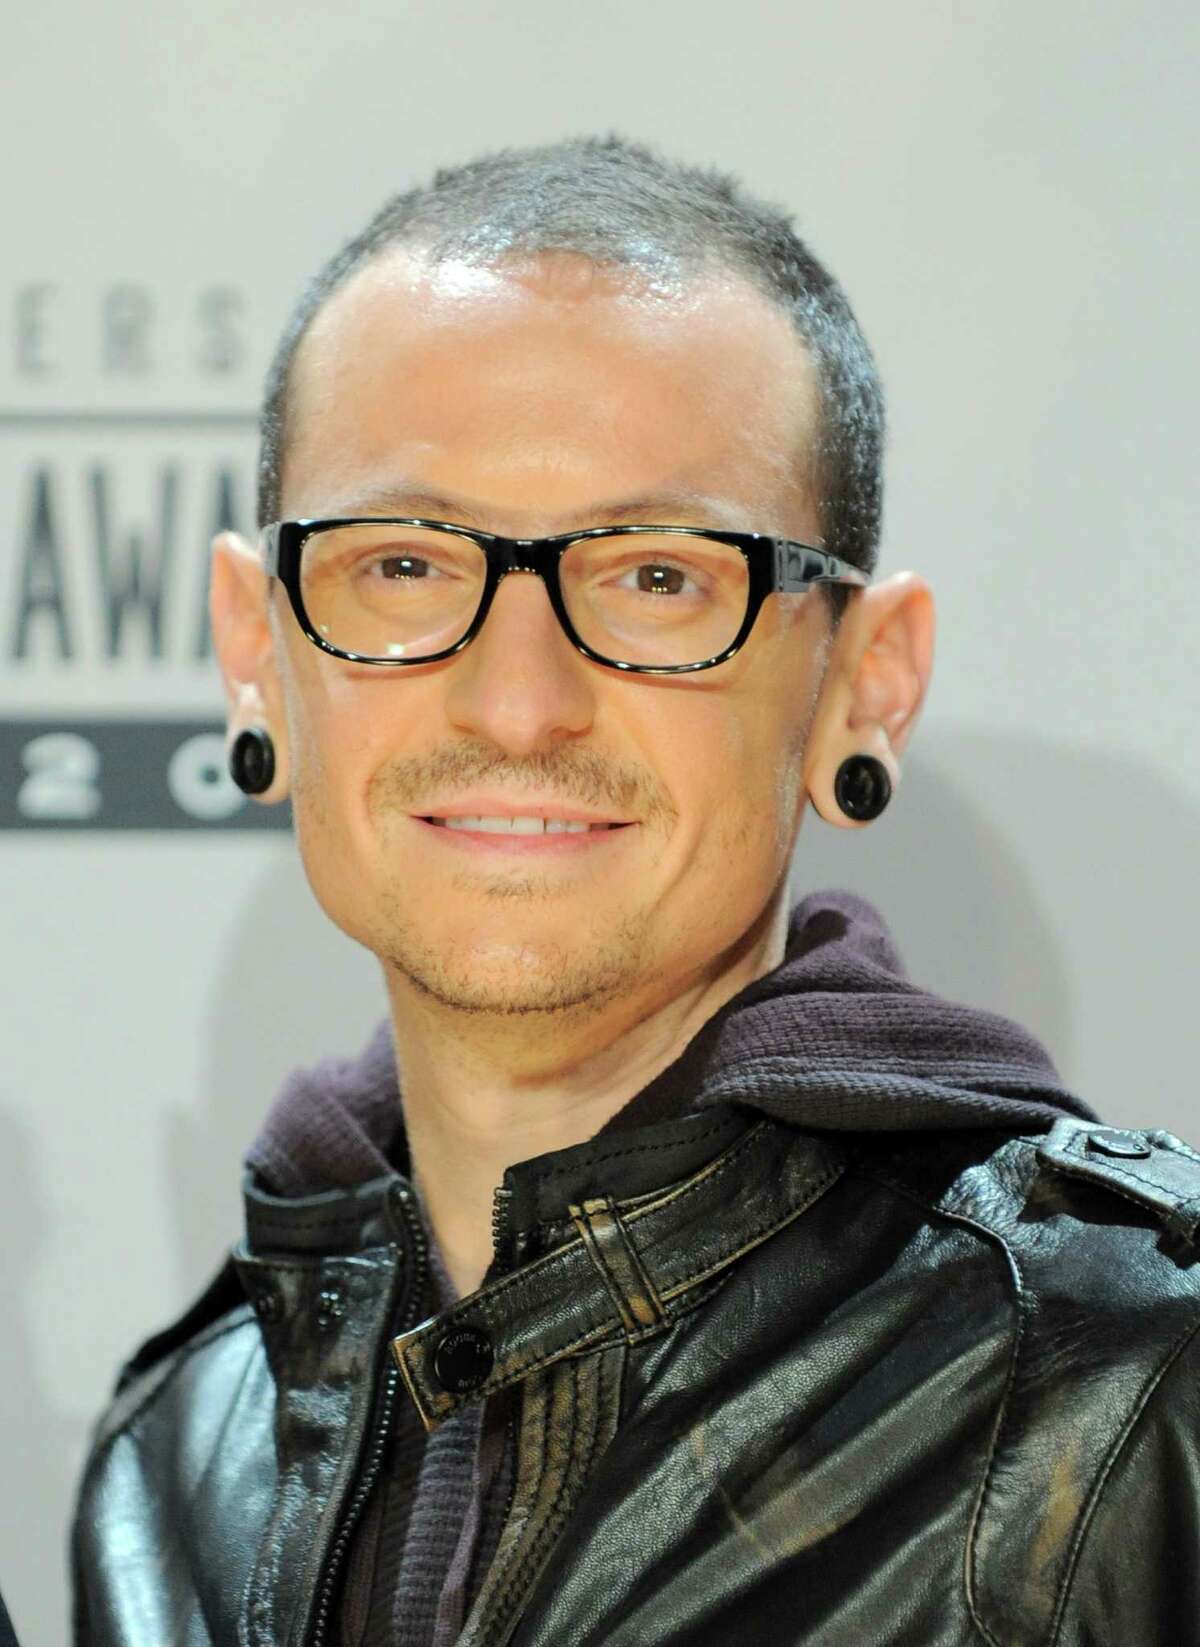 Chester Bennington, of musical group Linkin Park and winner of the award for alternative rock favorite artist, was found dead Thursday, according to TMZ. Click the gallery to other notable deaths of 2017.